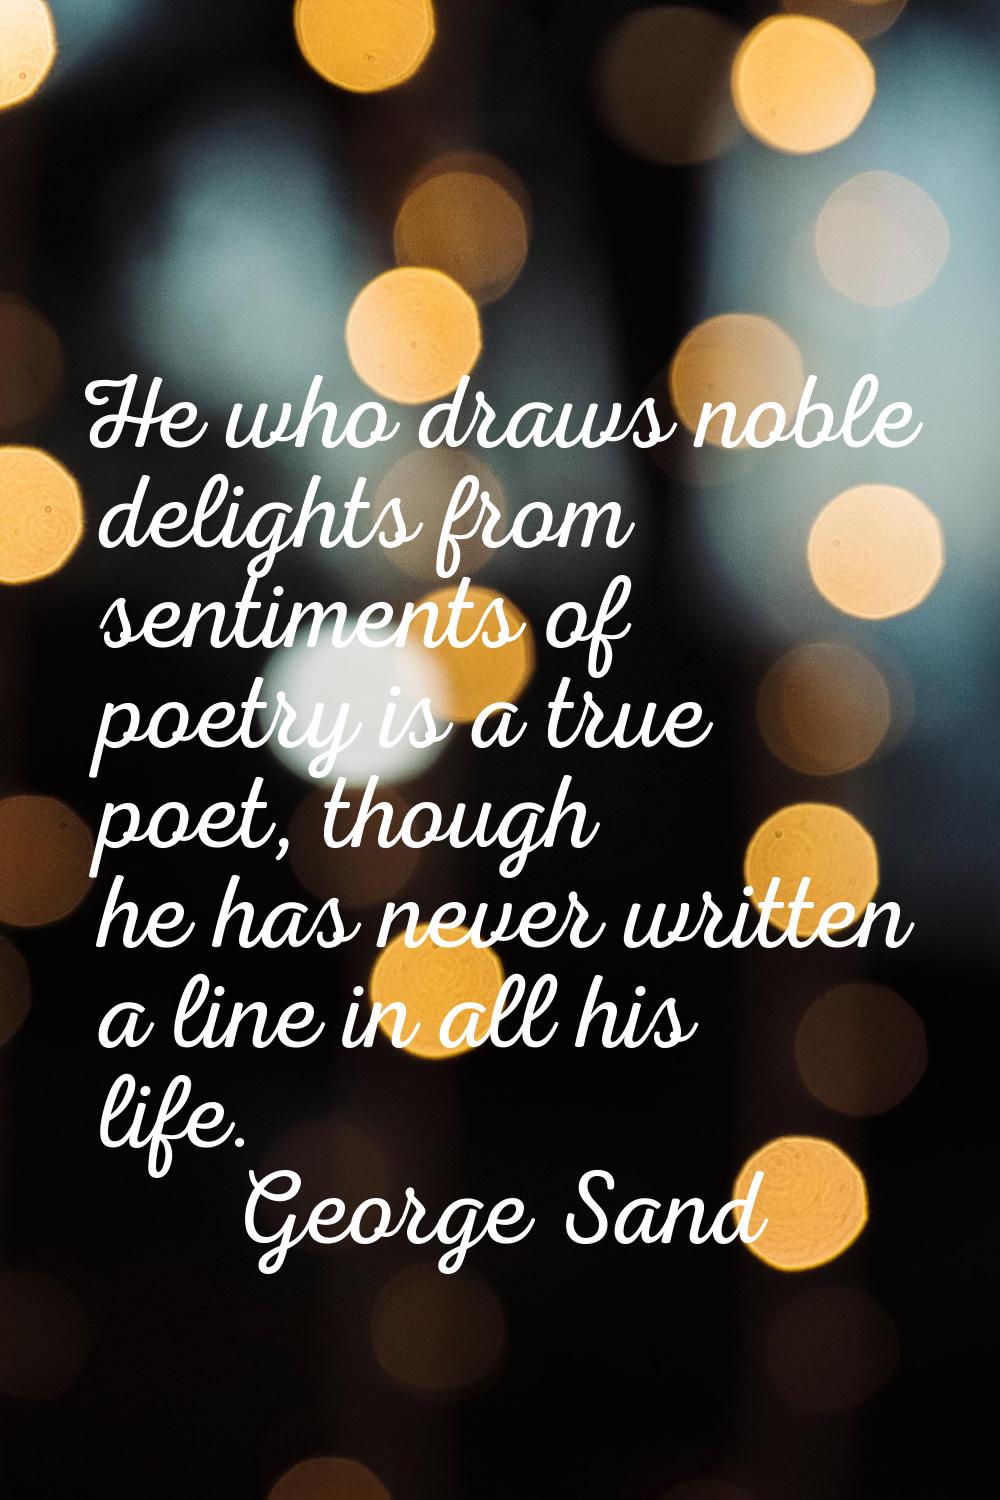 He who draws noble delights from sentiments of poetry is a true poet, though he has never written a